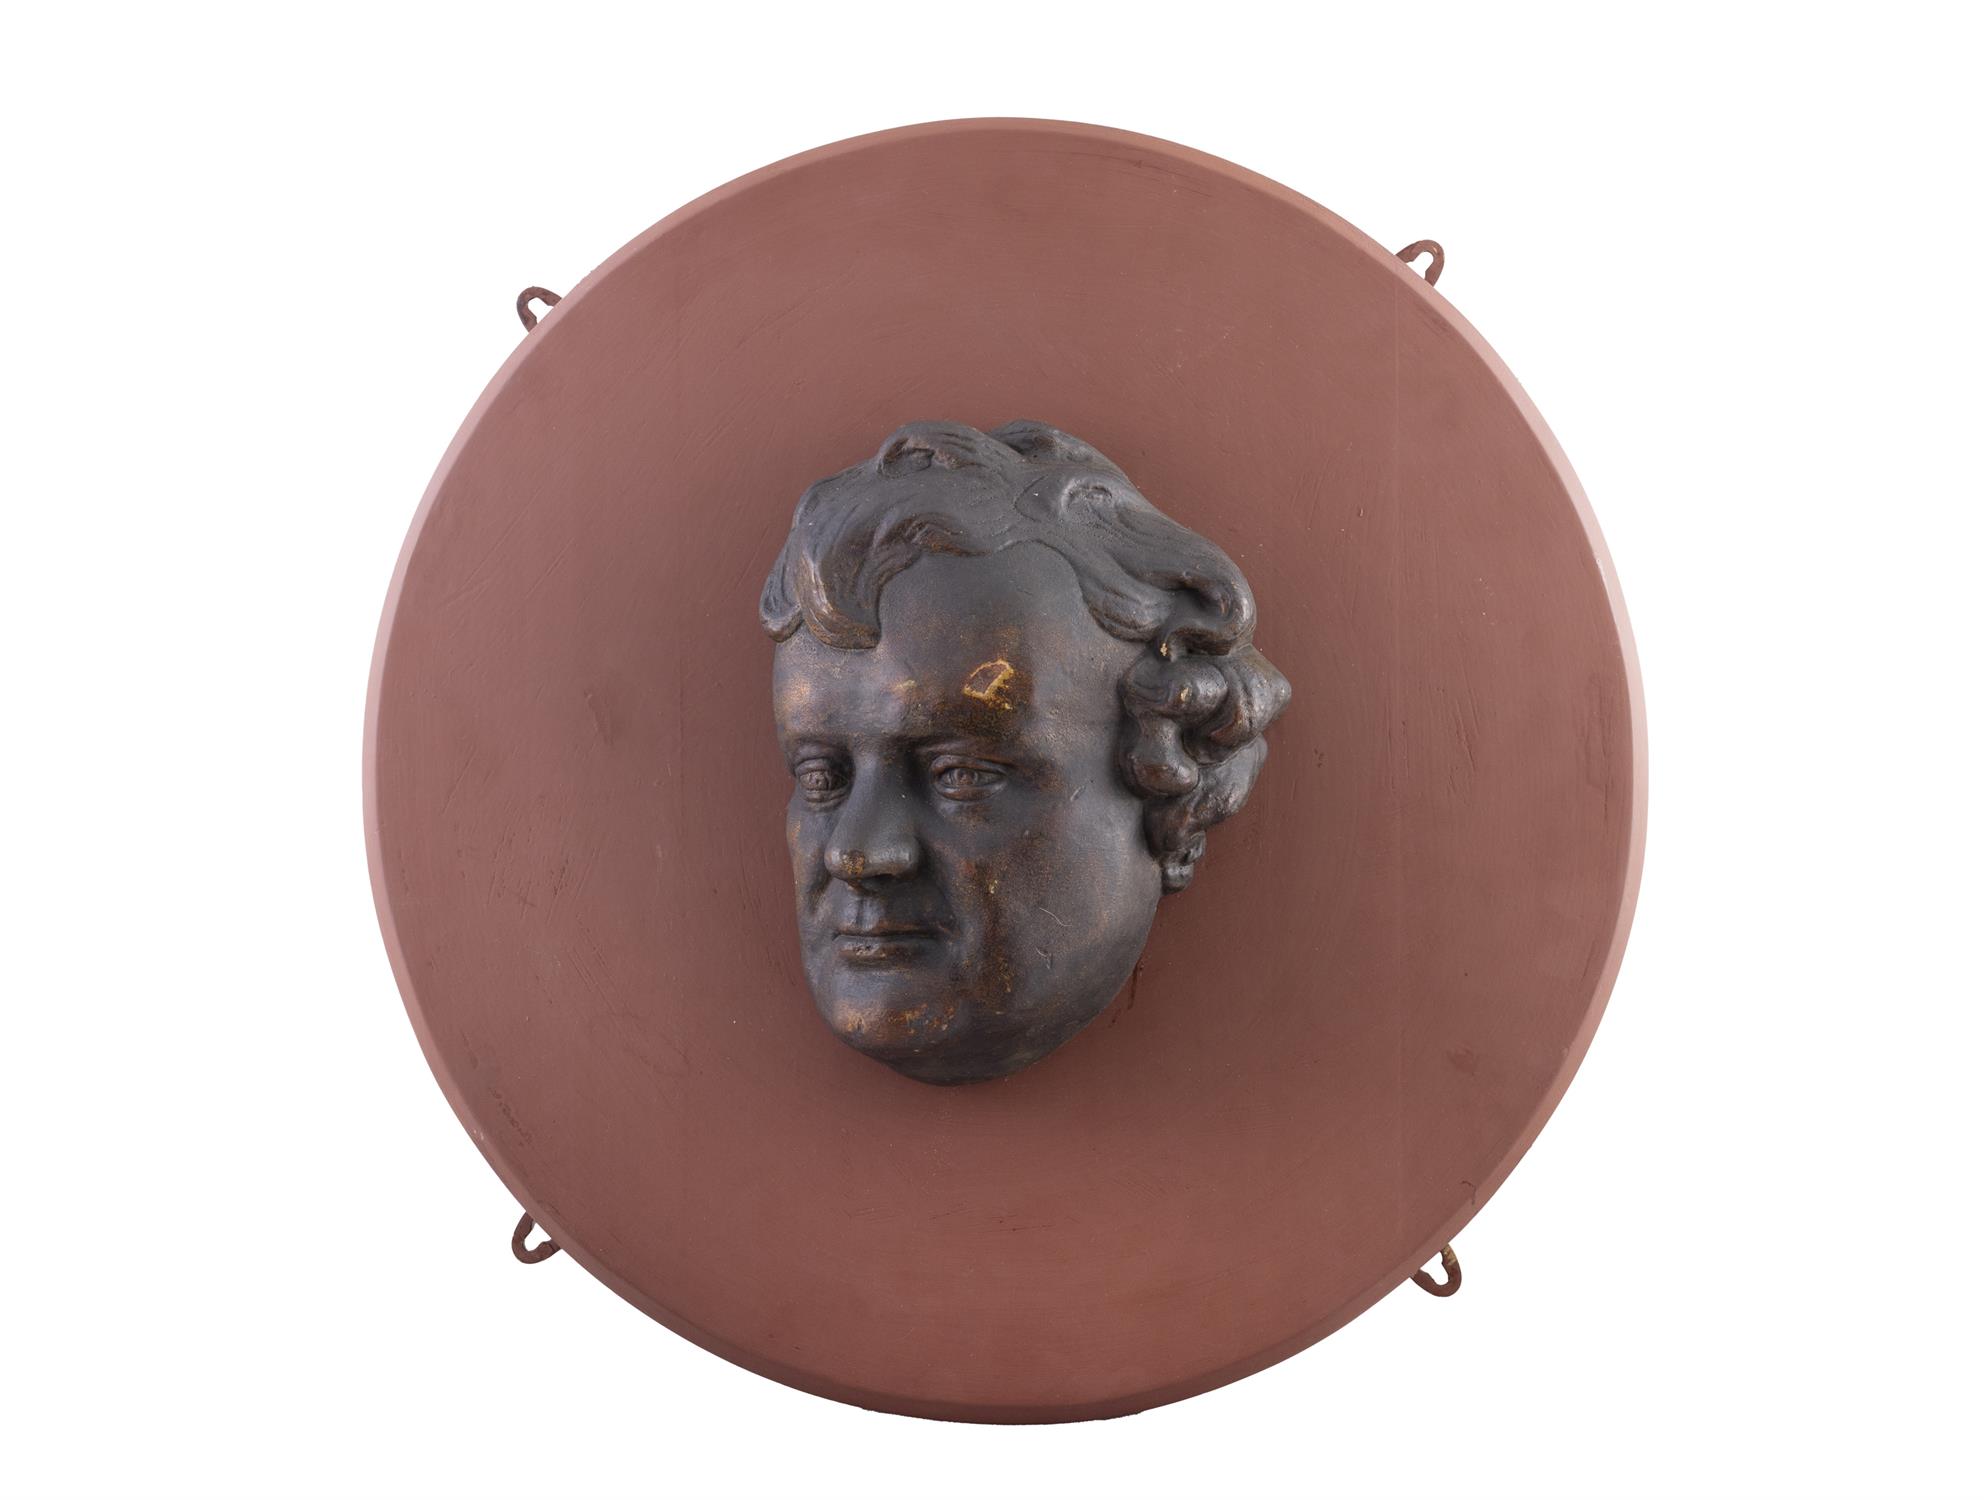 ***Please note: this is ceramic with a 'bronzed' finish rather than bronze*** A BRONZED DEATH MASK